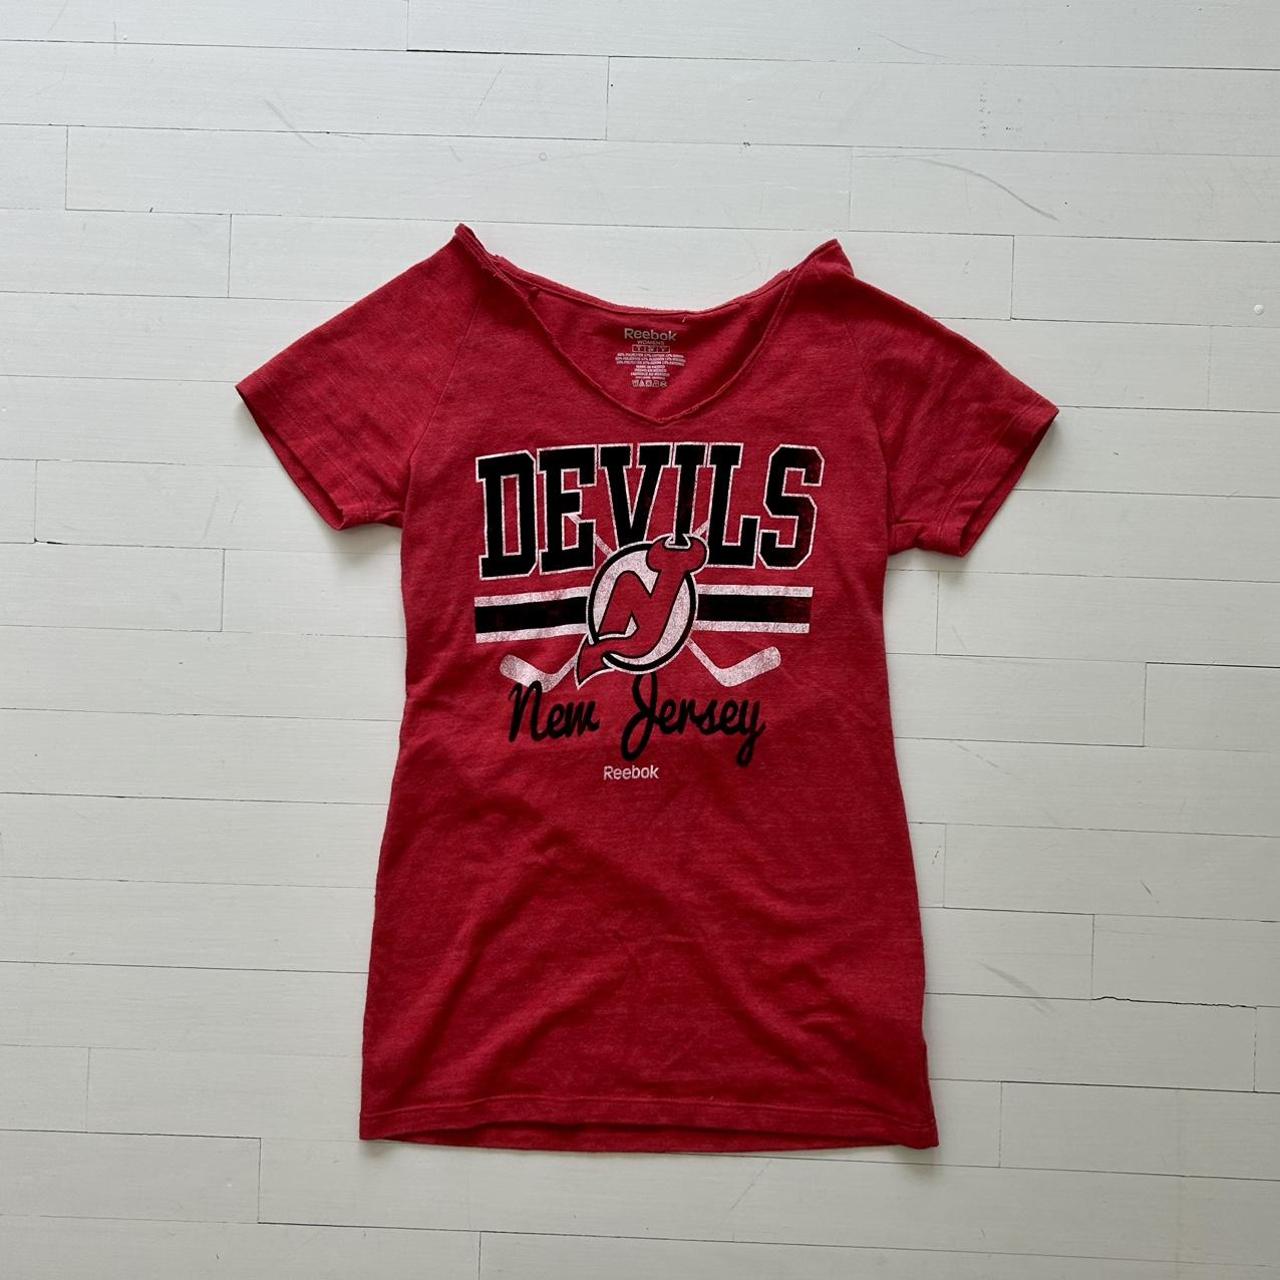 2000s V-necked Devils tee ️ Super cute off the... - Depop